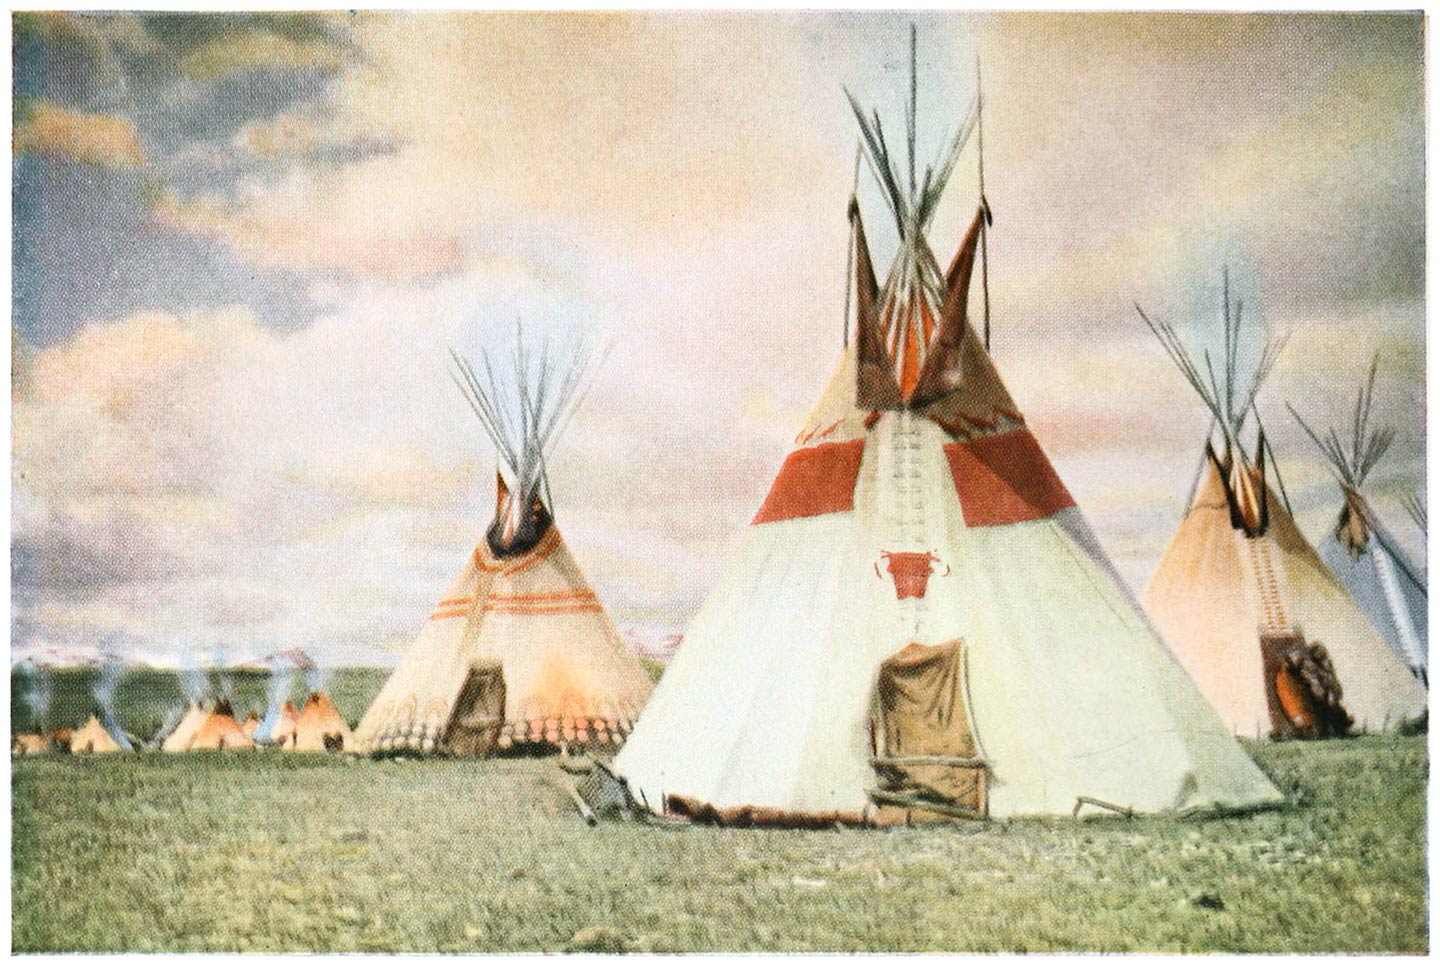 INNER CIRCLE OF THE TRIBAL CAMP